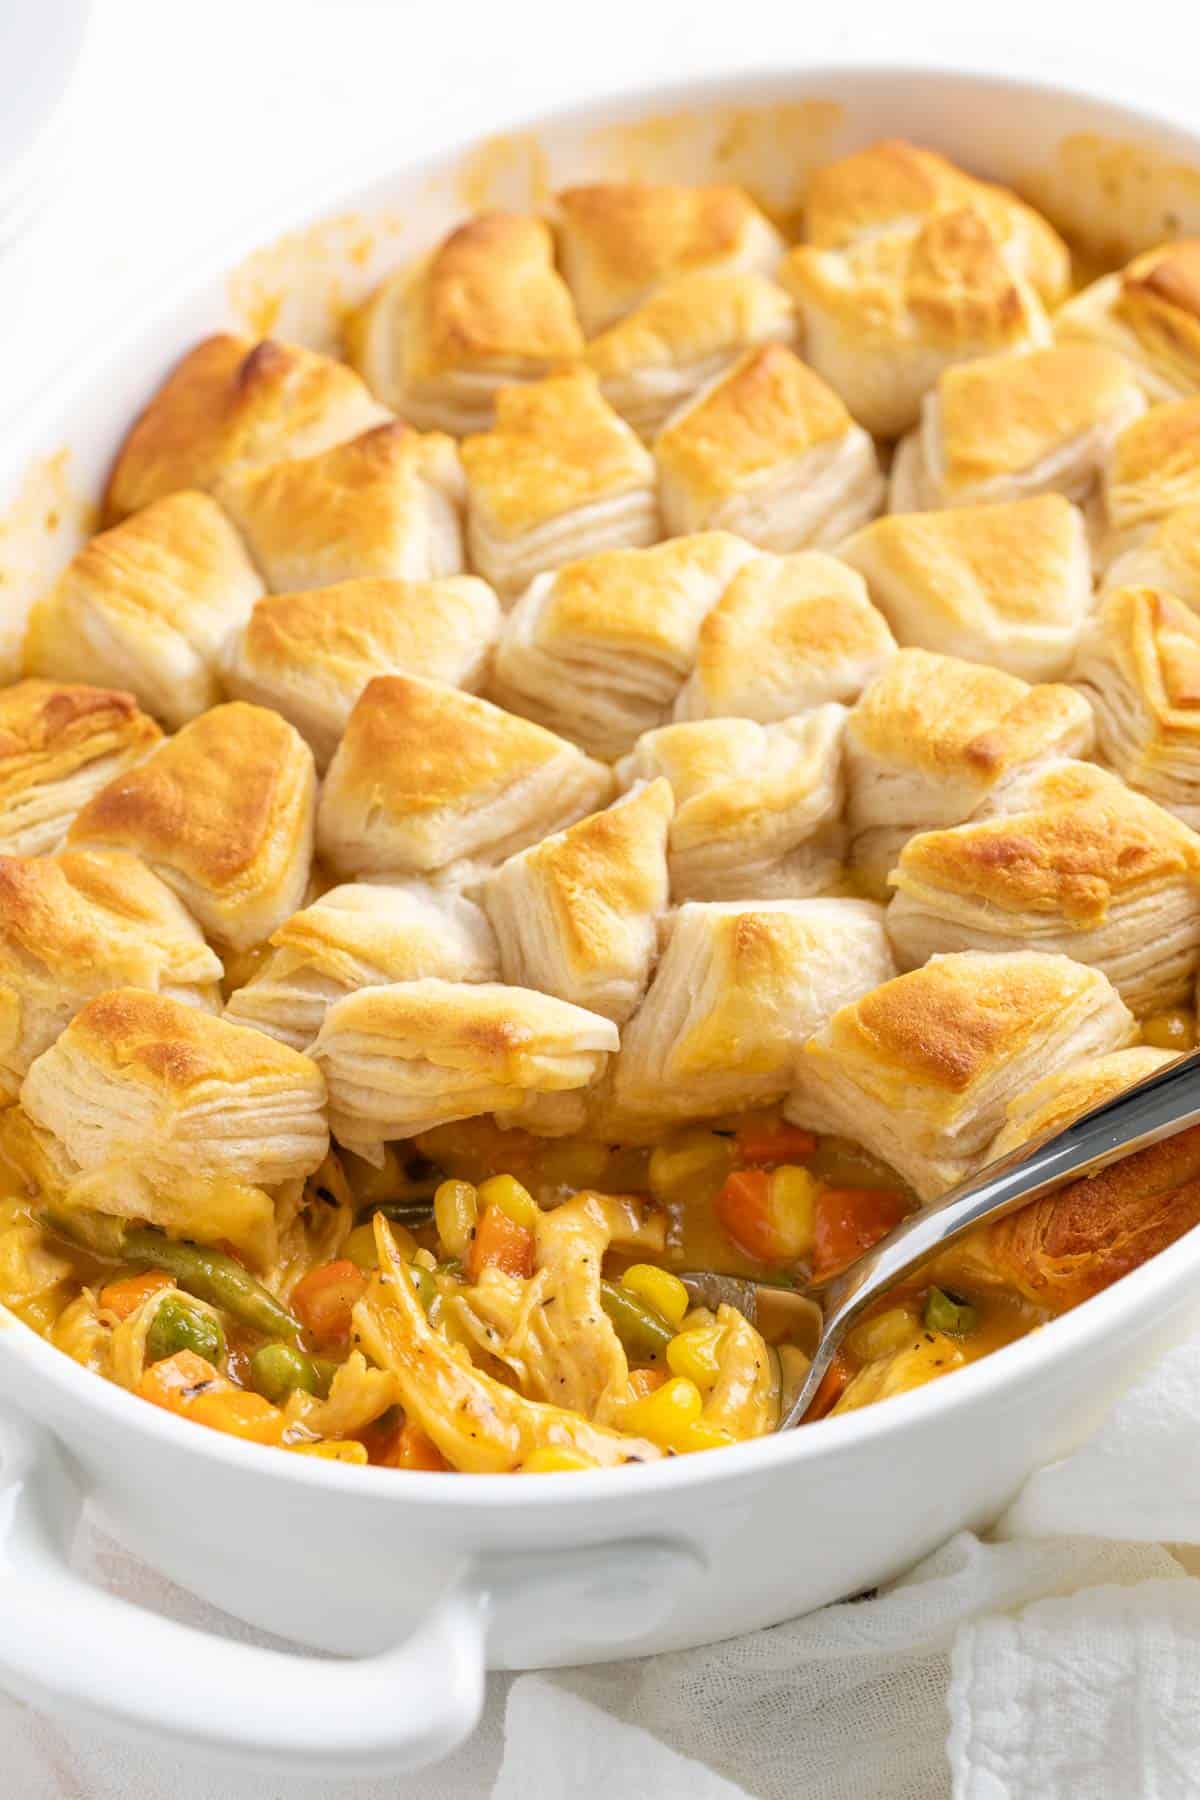 Front close-up view of a spoon in a baking dish with cheesy chicken pot pie topped with canned biscuits.